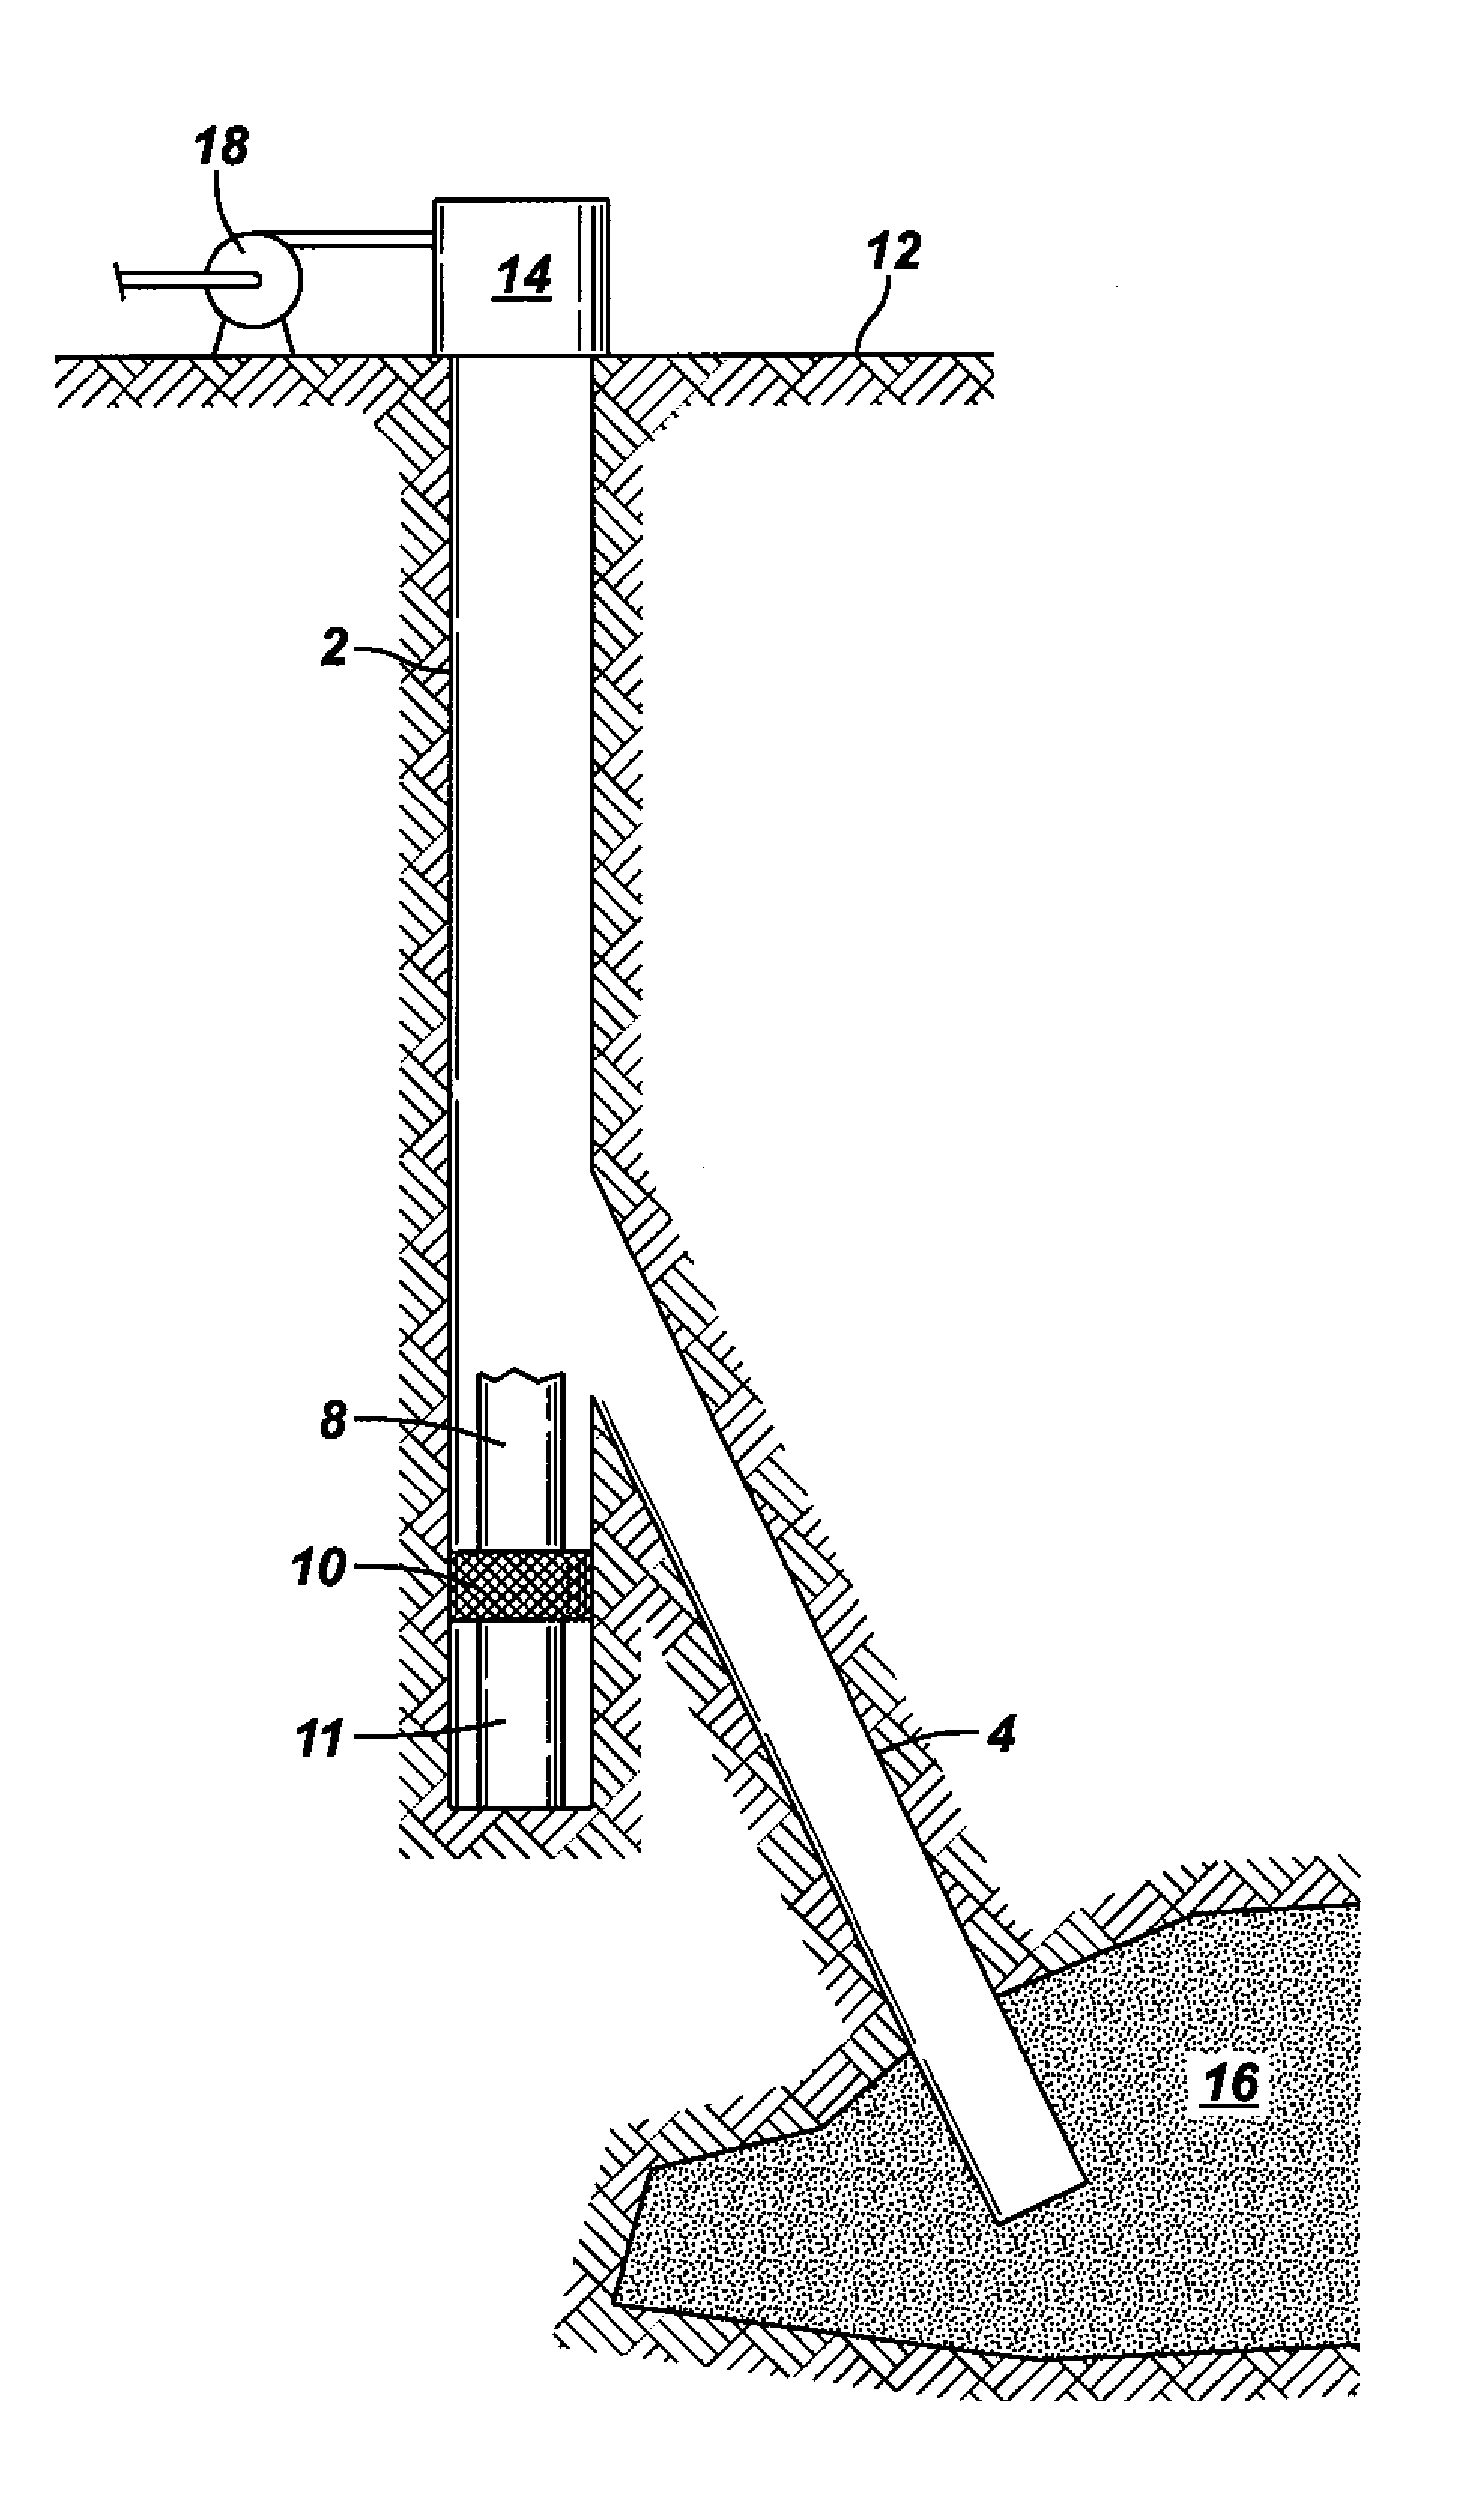 Degradable whipstock apparatus and method of use